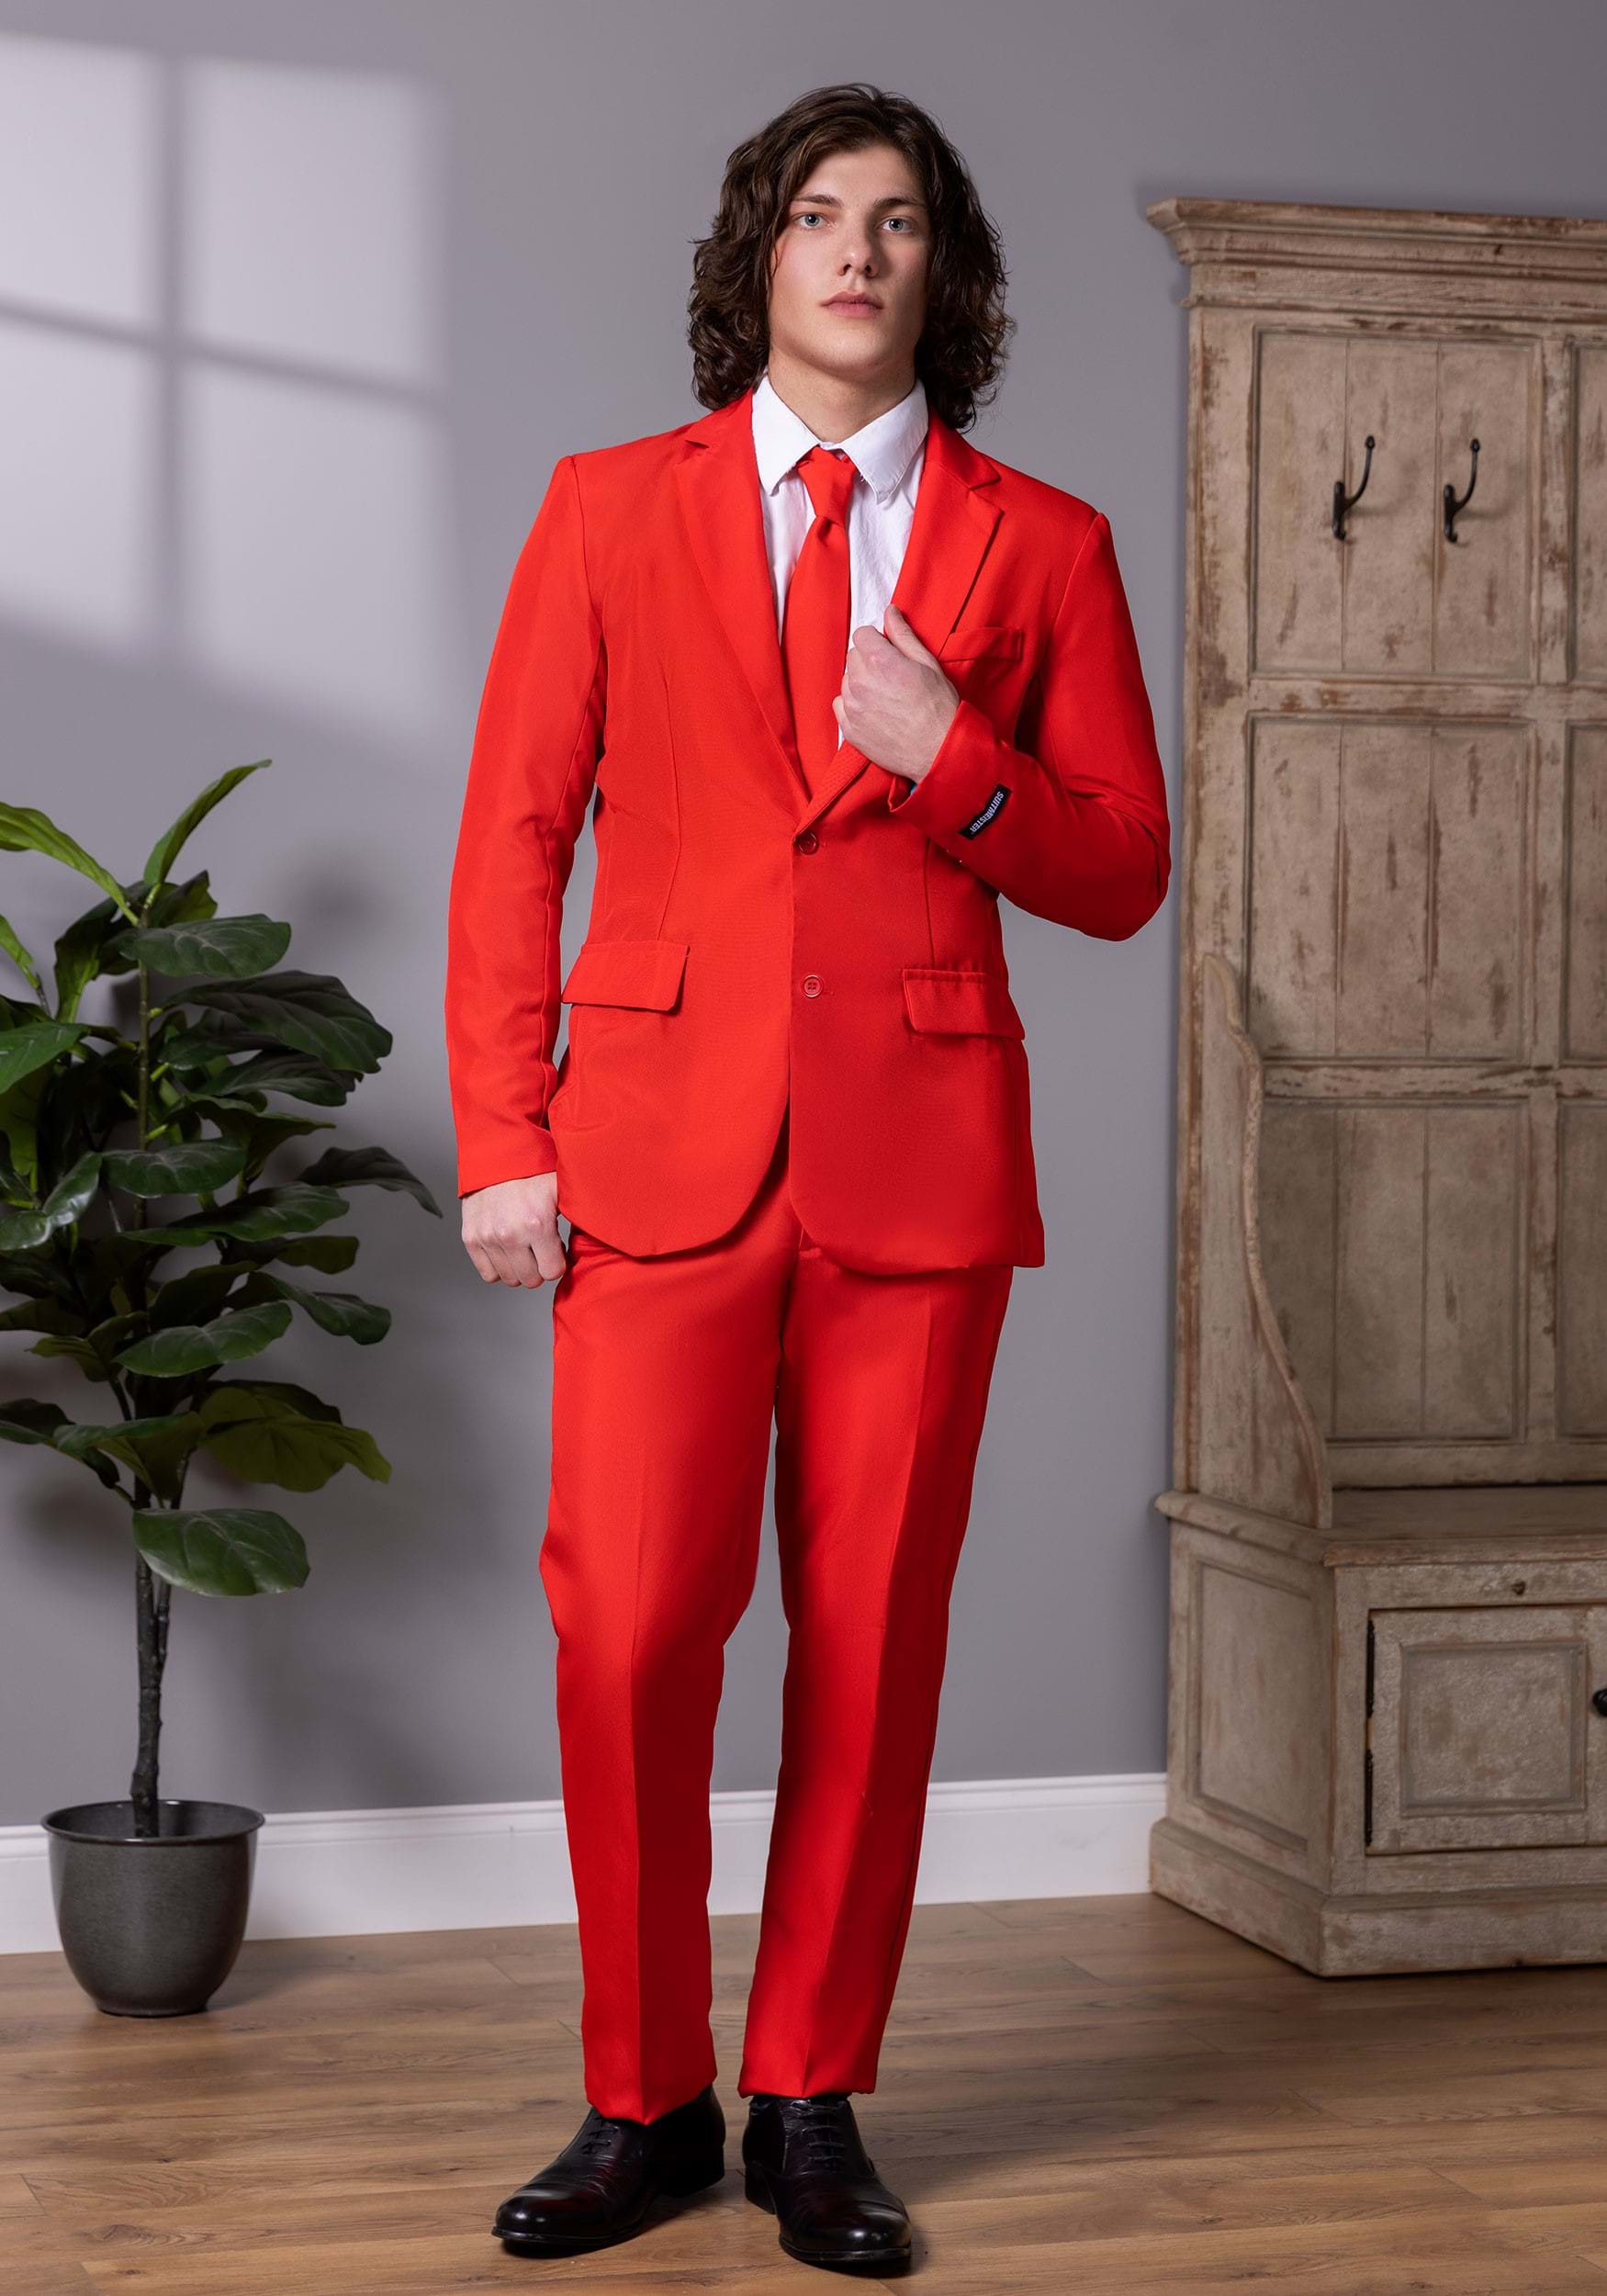 Suitmeister Men's Solid Red Suit